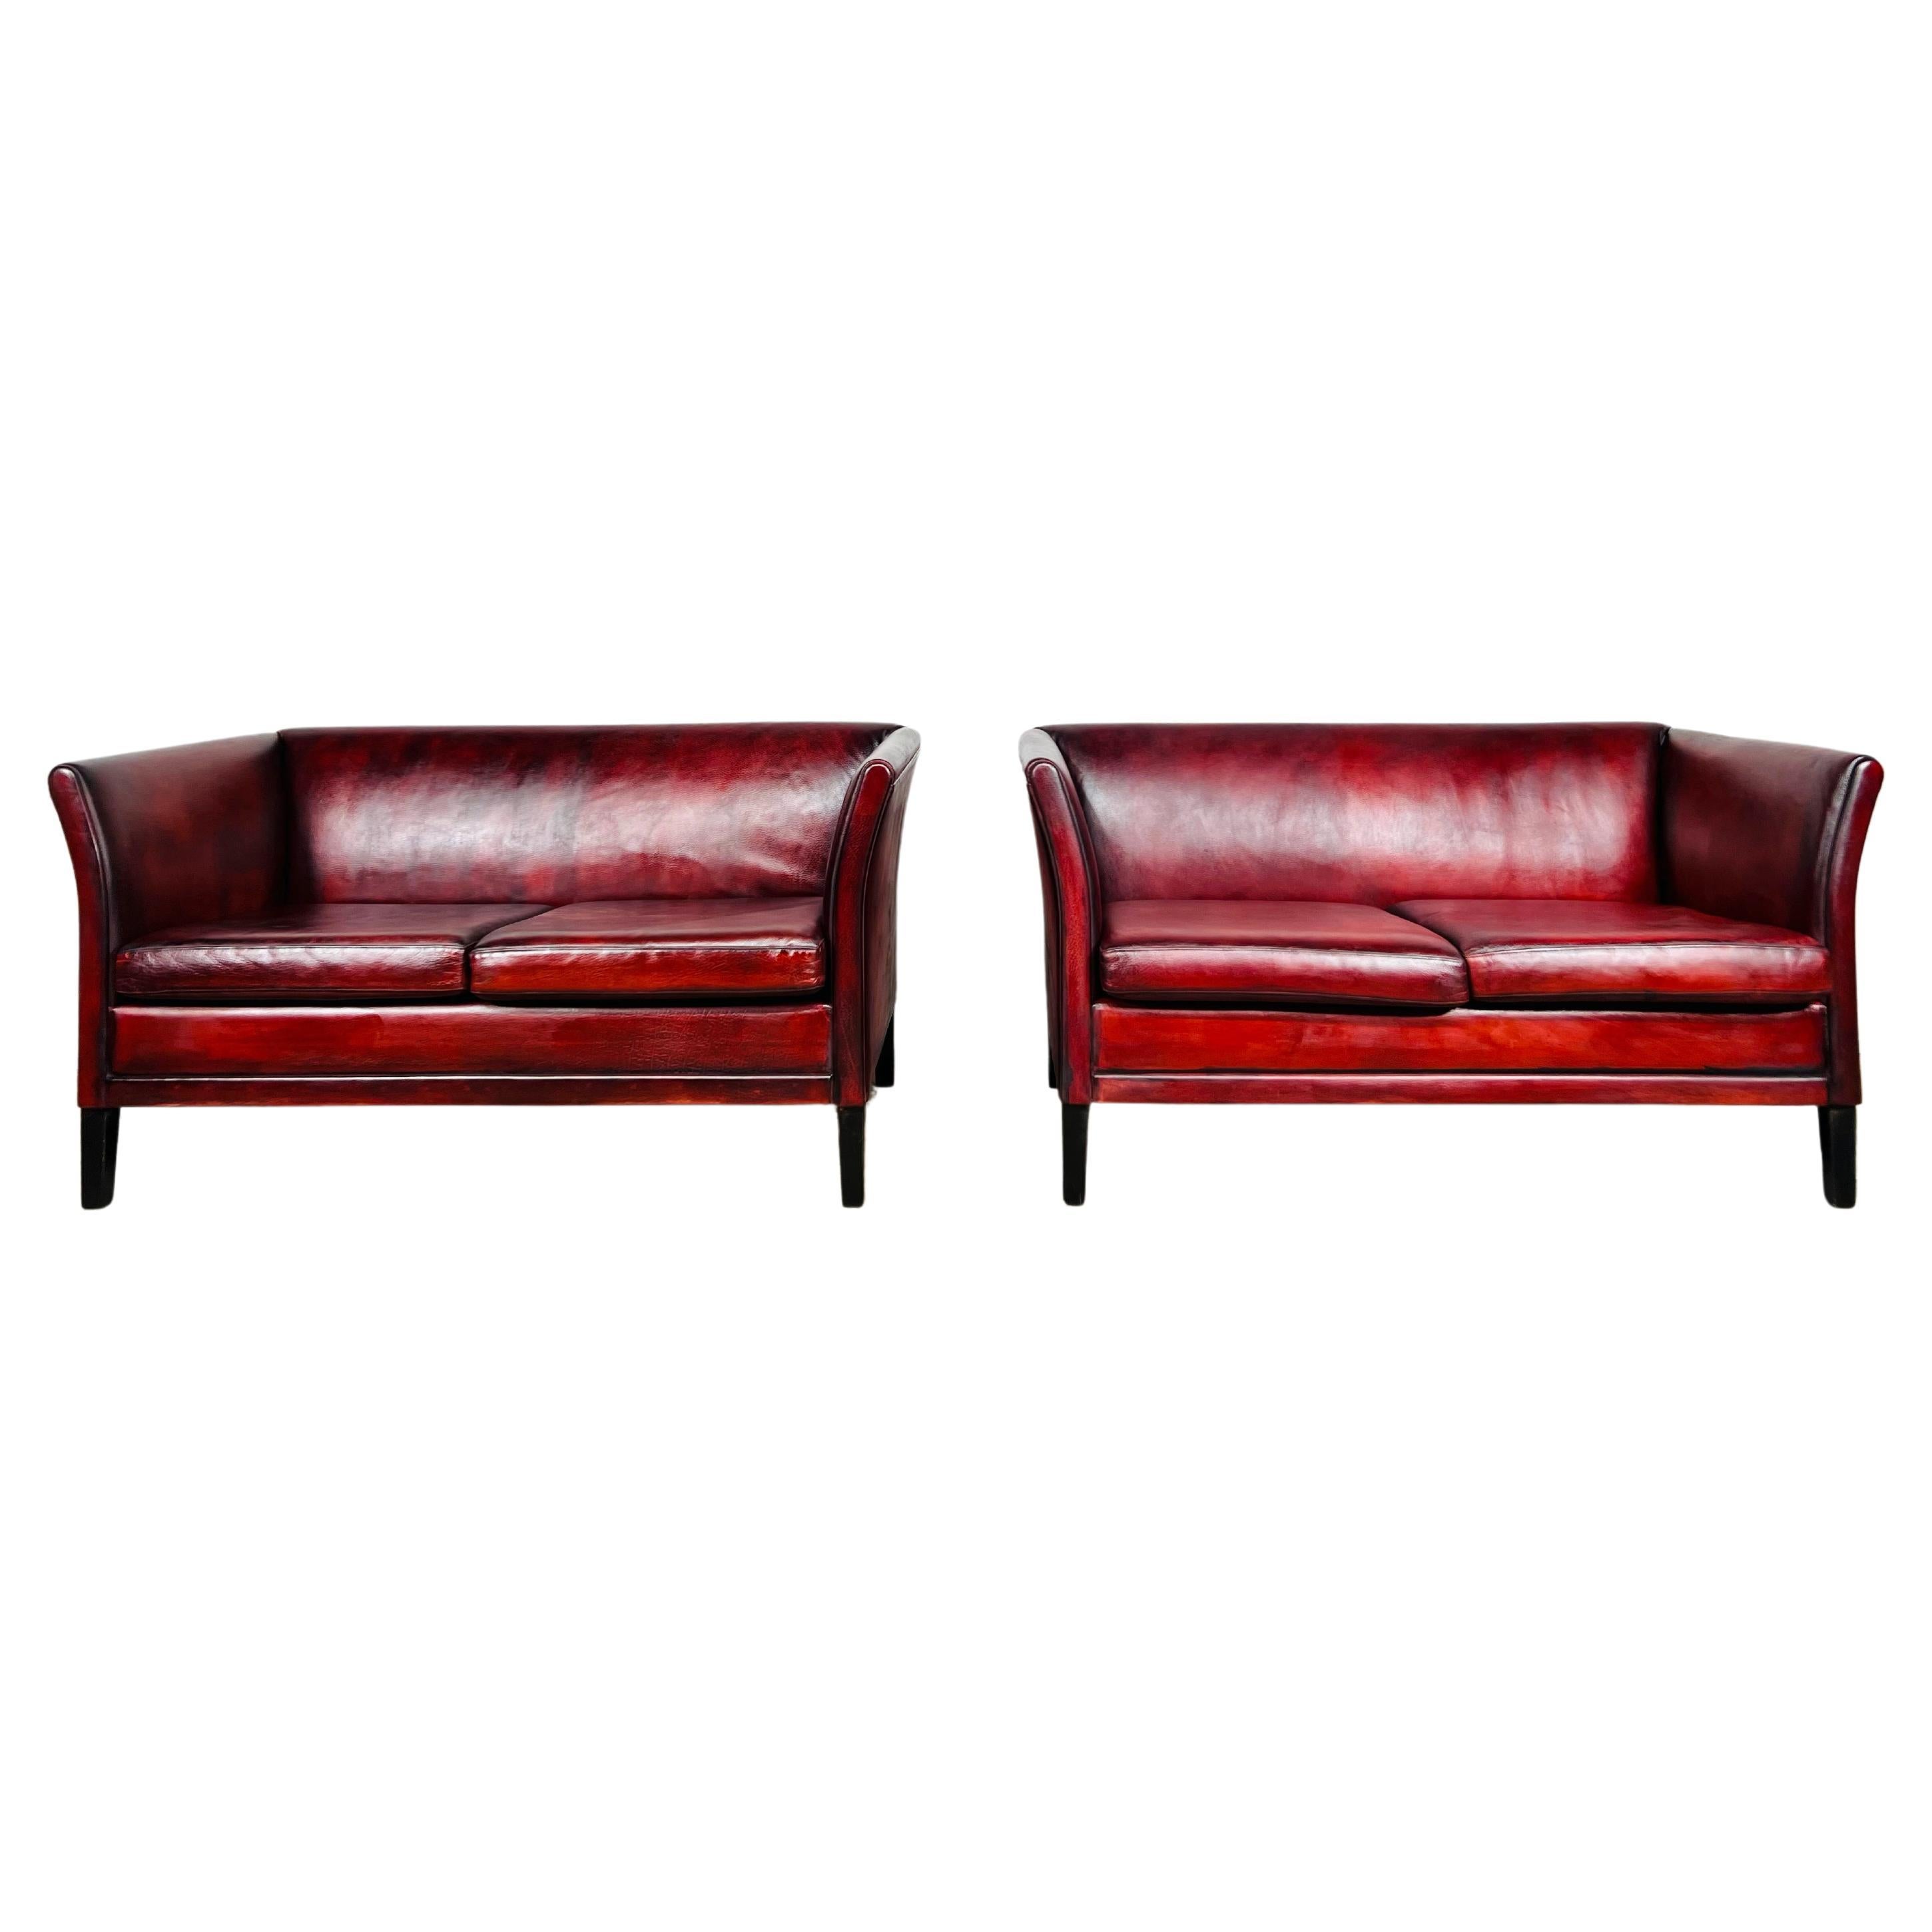 Pair of Neat Vintage Danish 70s Patinated Chestnut Red 2 Seat Leather Sofas#805